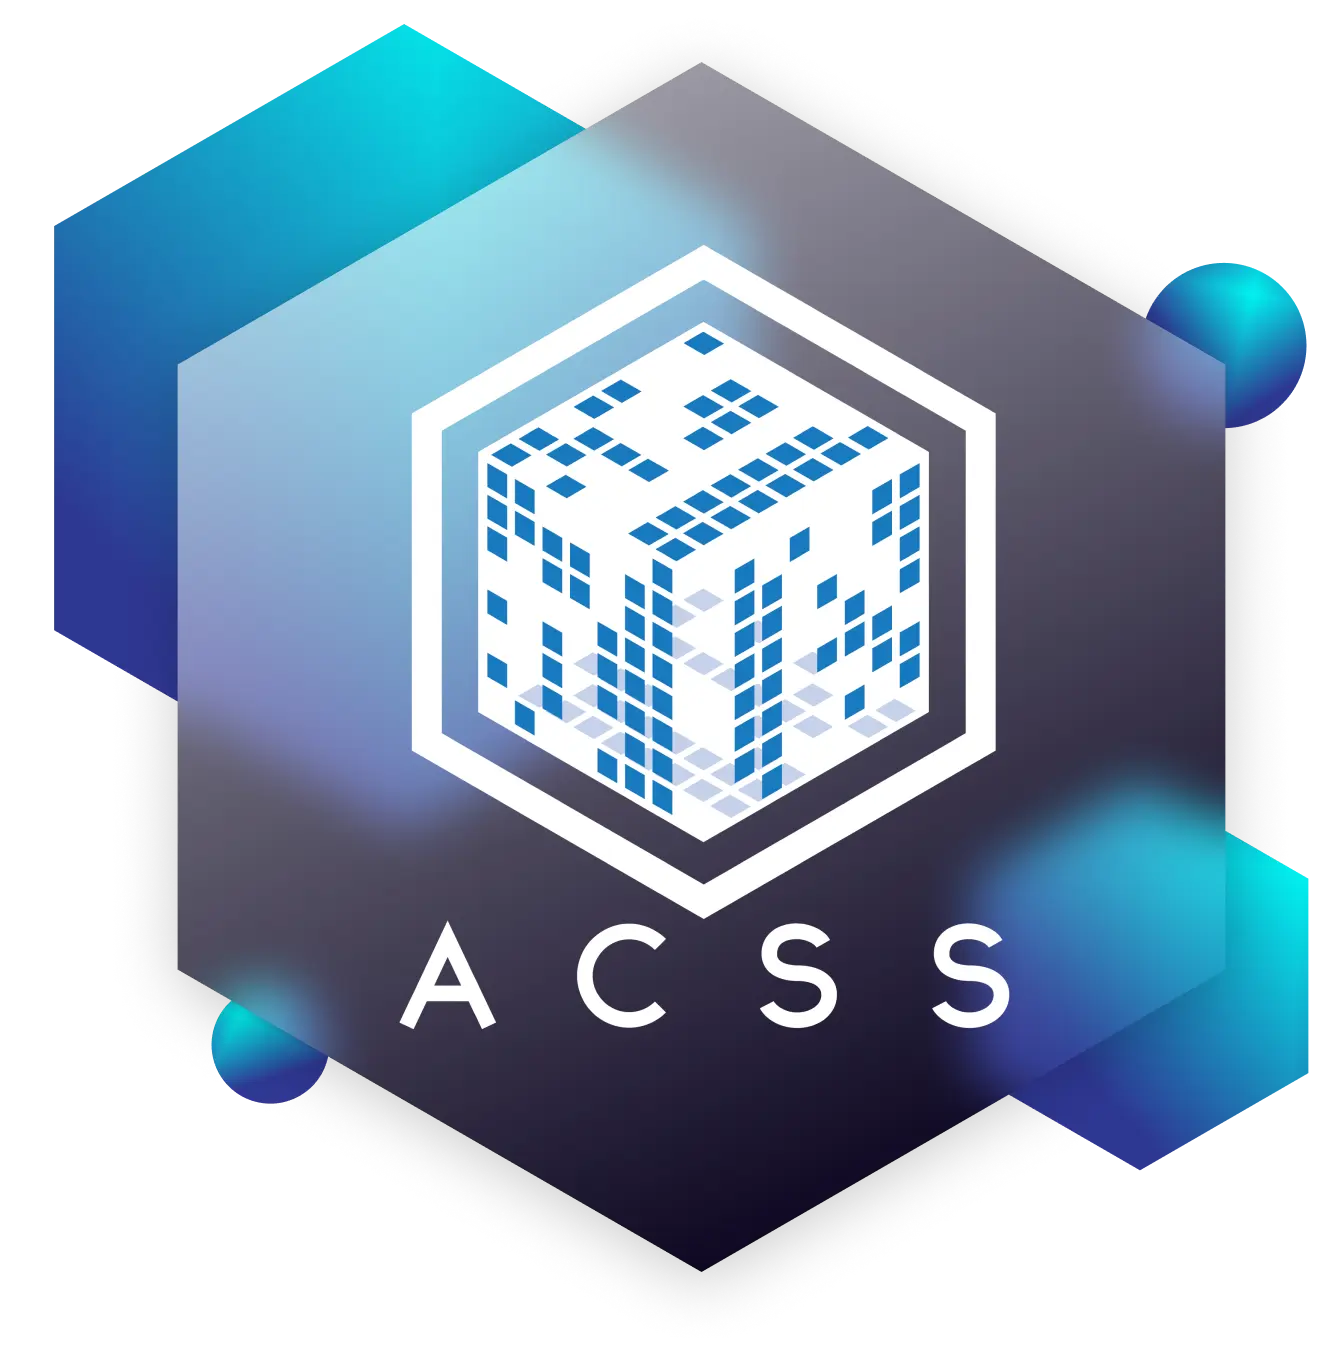 The seal of ACSS placed on top of a glass object.